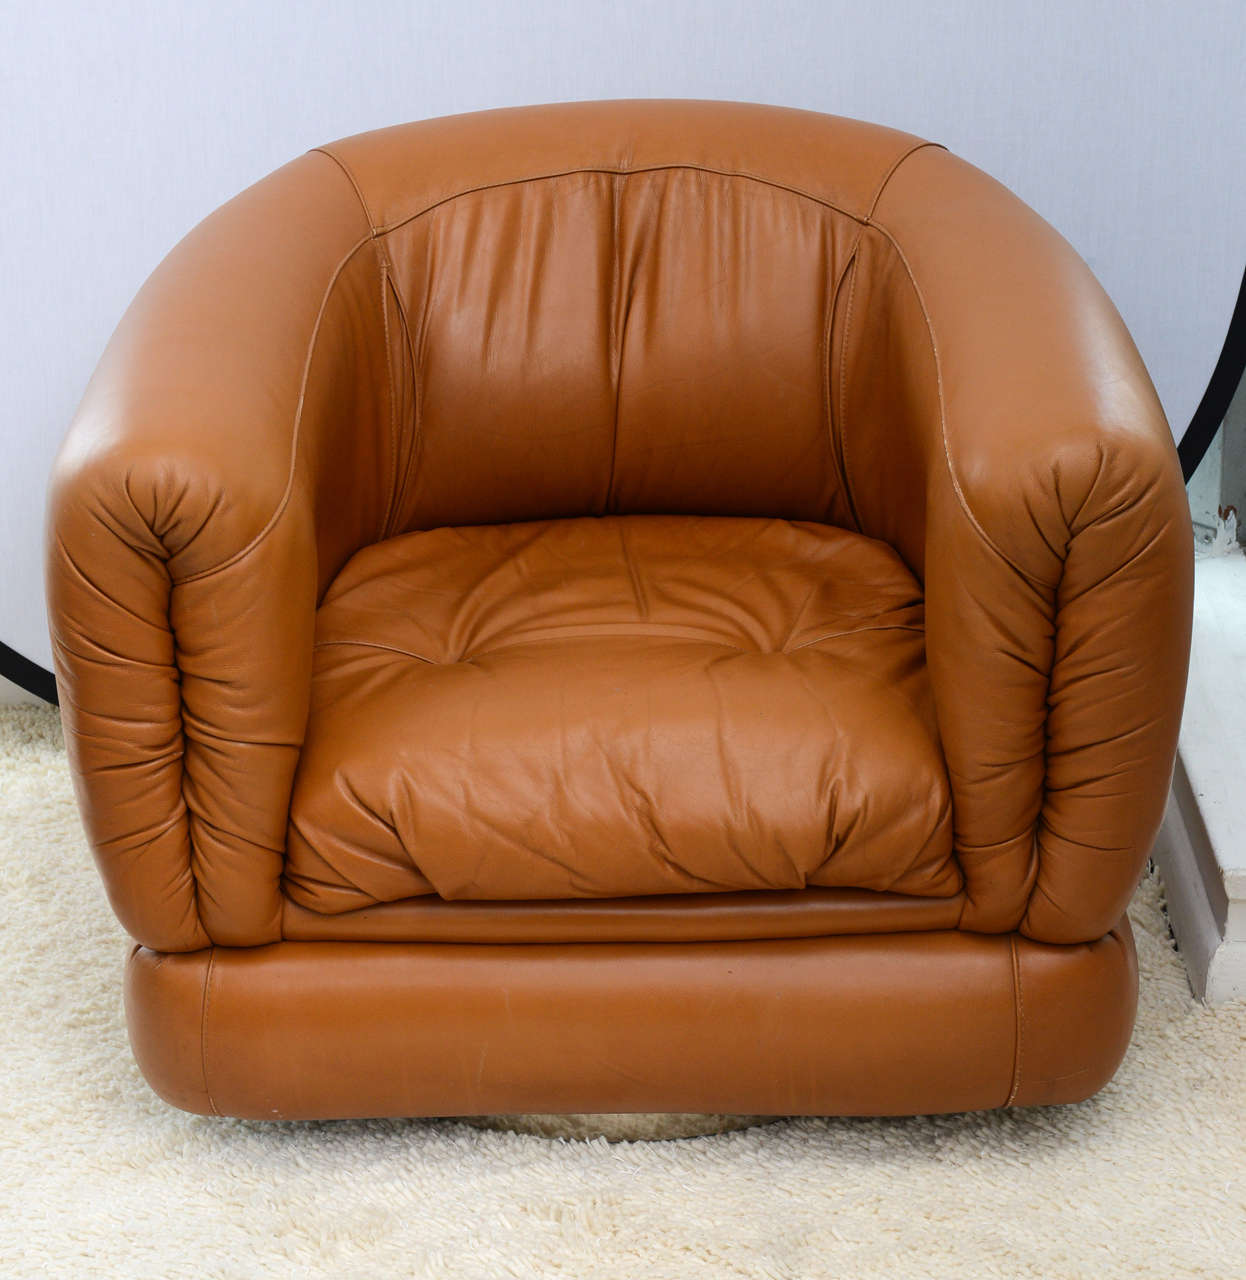 Those gorgeous leather chairs are very comfortable. They are swiveling at 360 degrees on a metal base. The leather are in good condition.